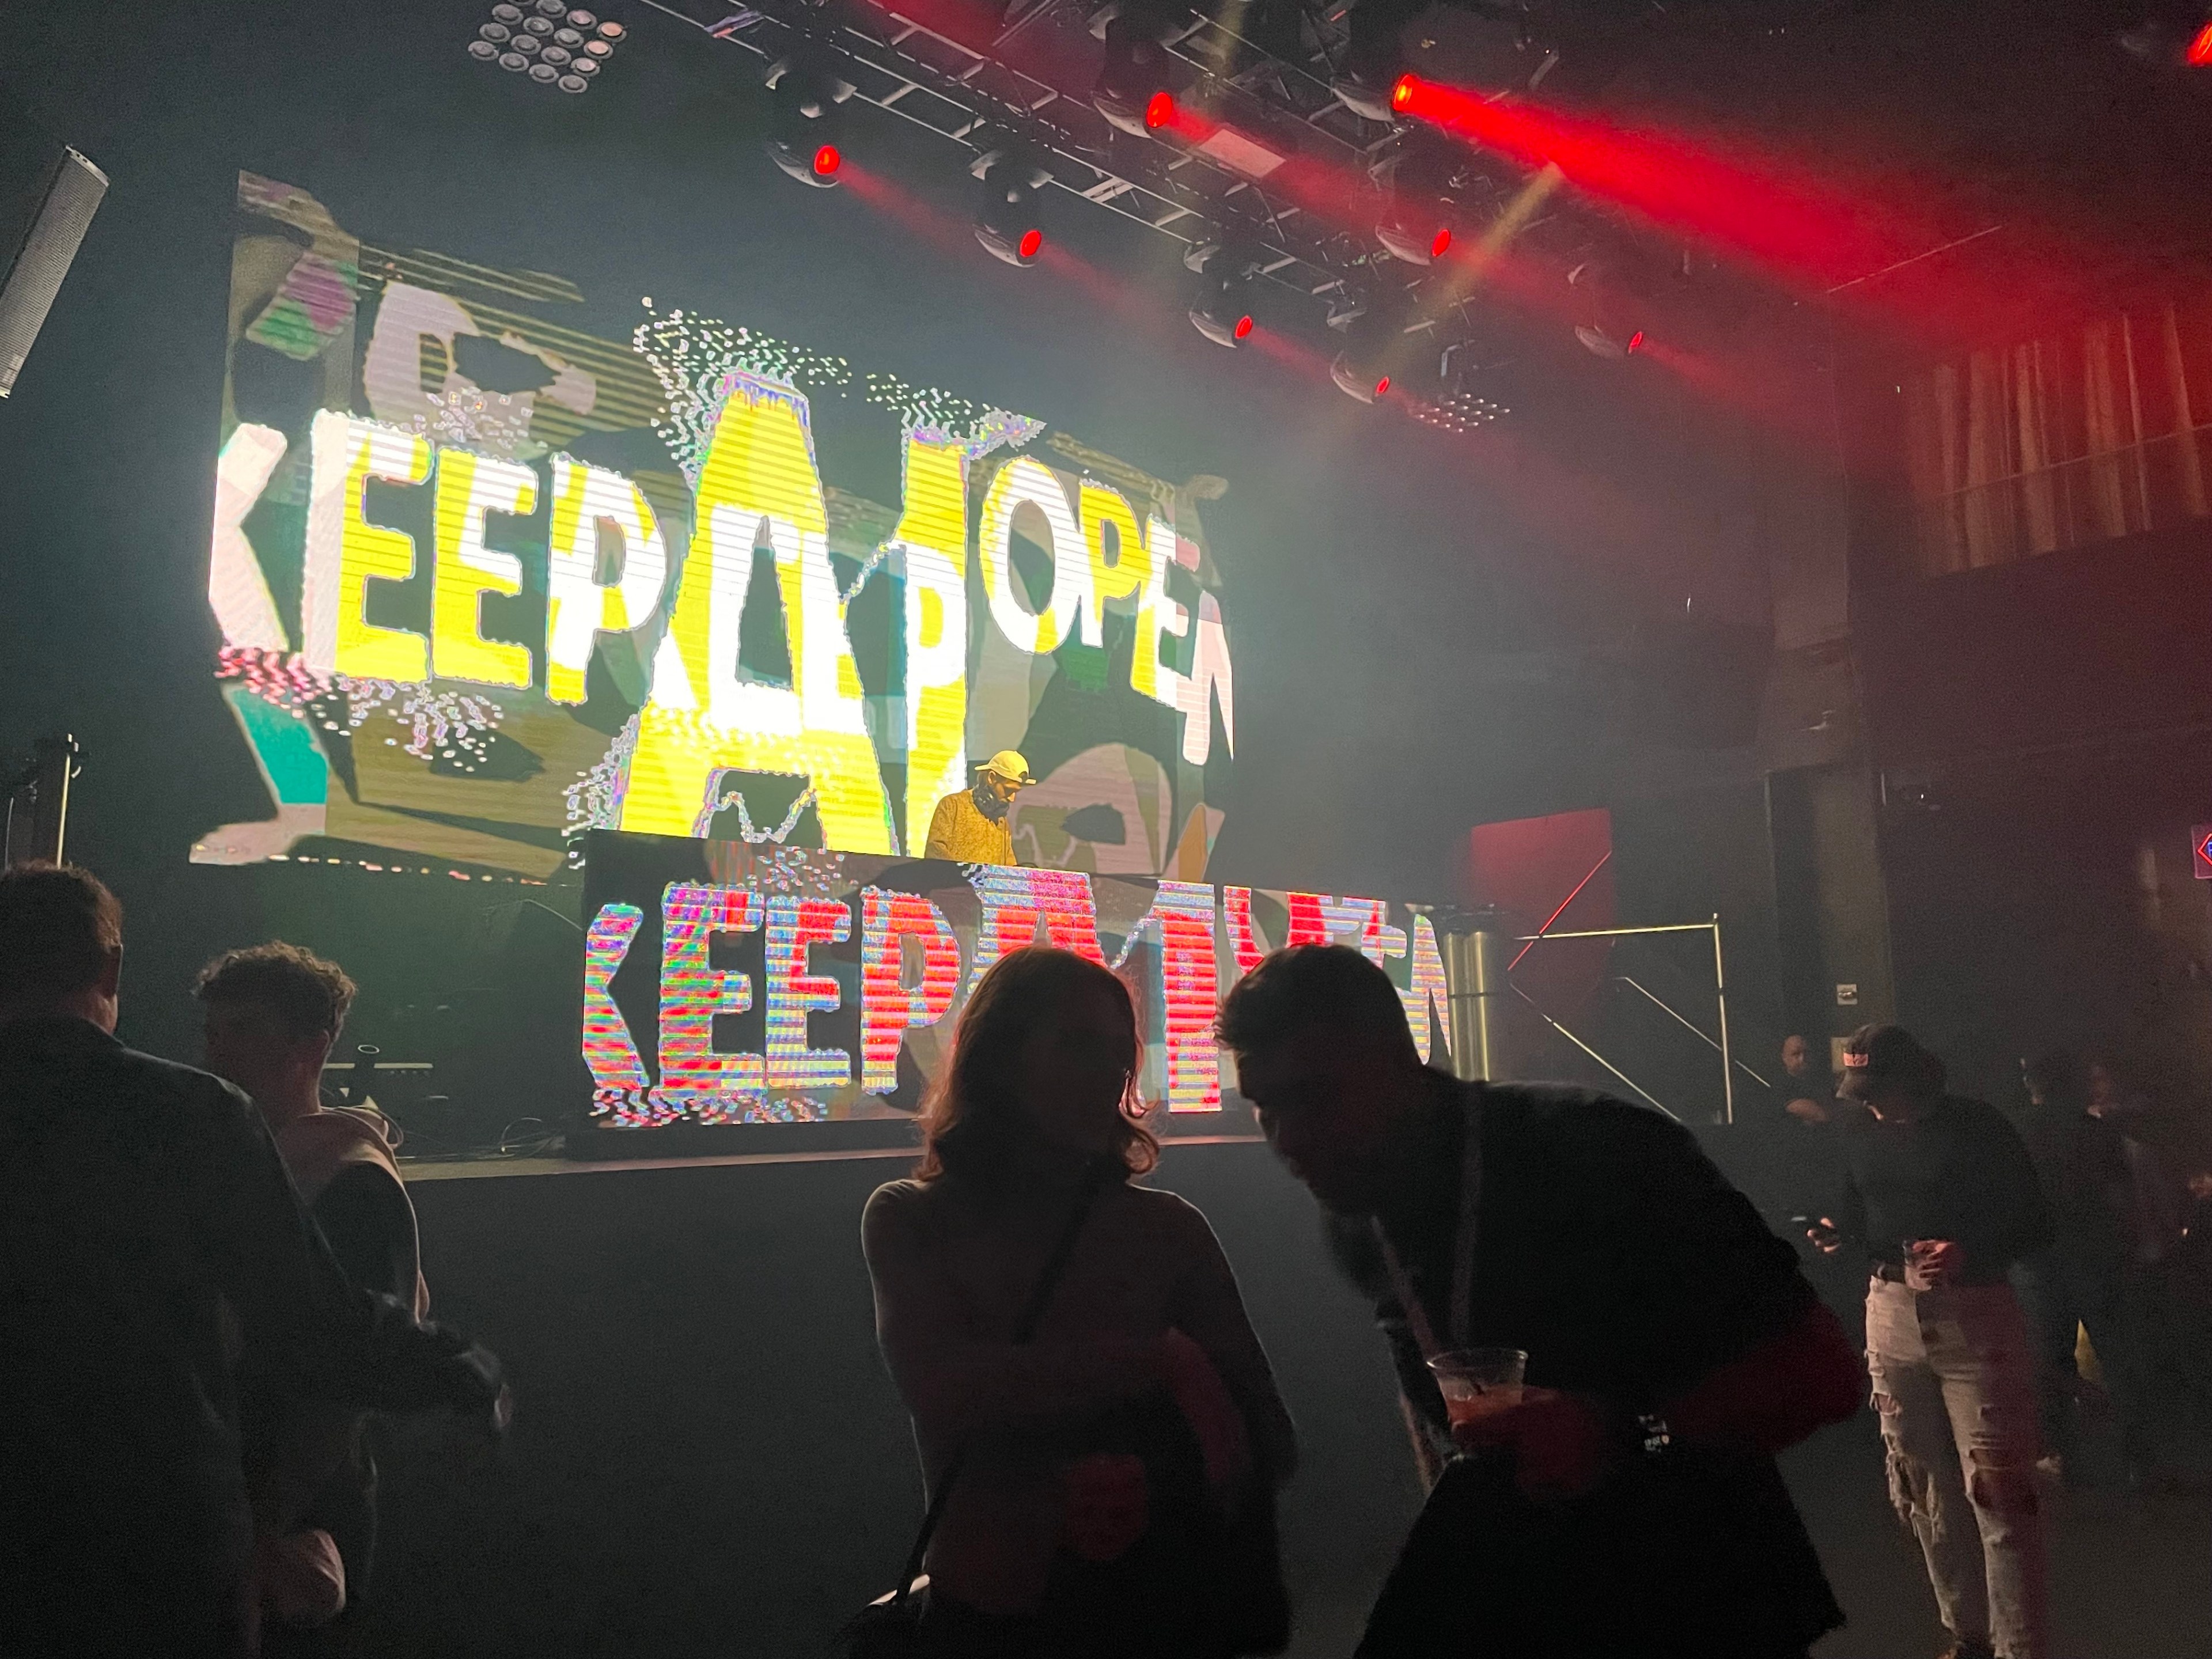 The silhouettes of several people are seen in front of a large light-up sign reading "keep AI open" in multi-color letters above a stage at a nightclub with spotlights shining red lights away from the stage.